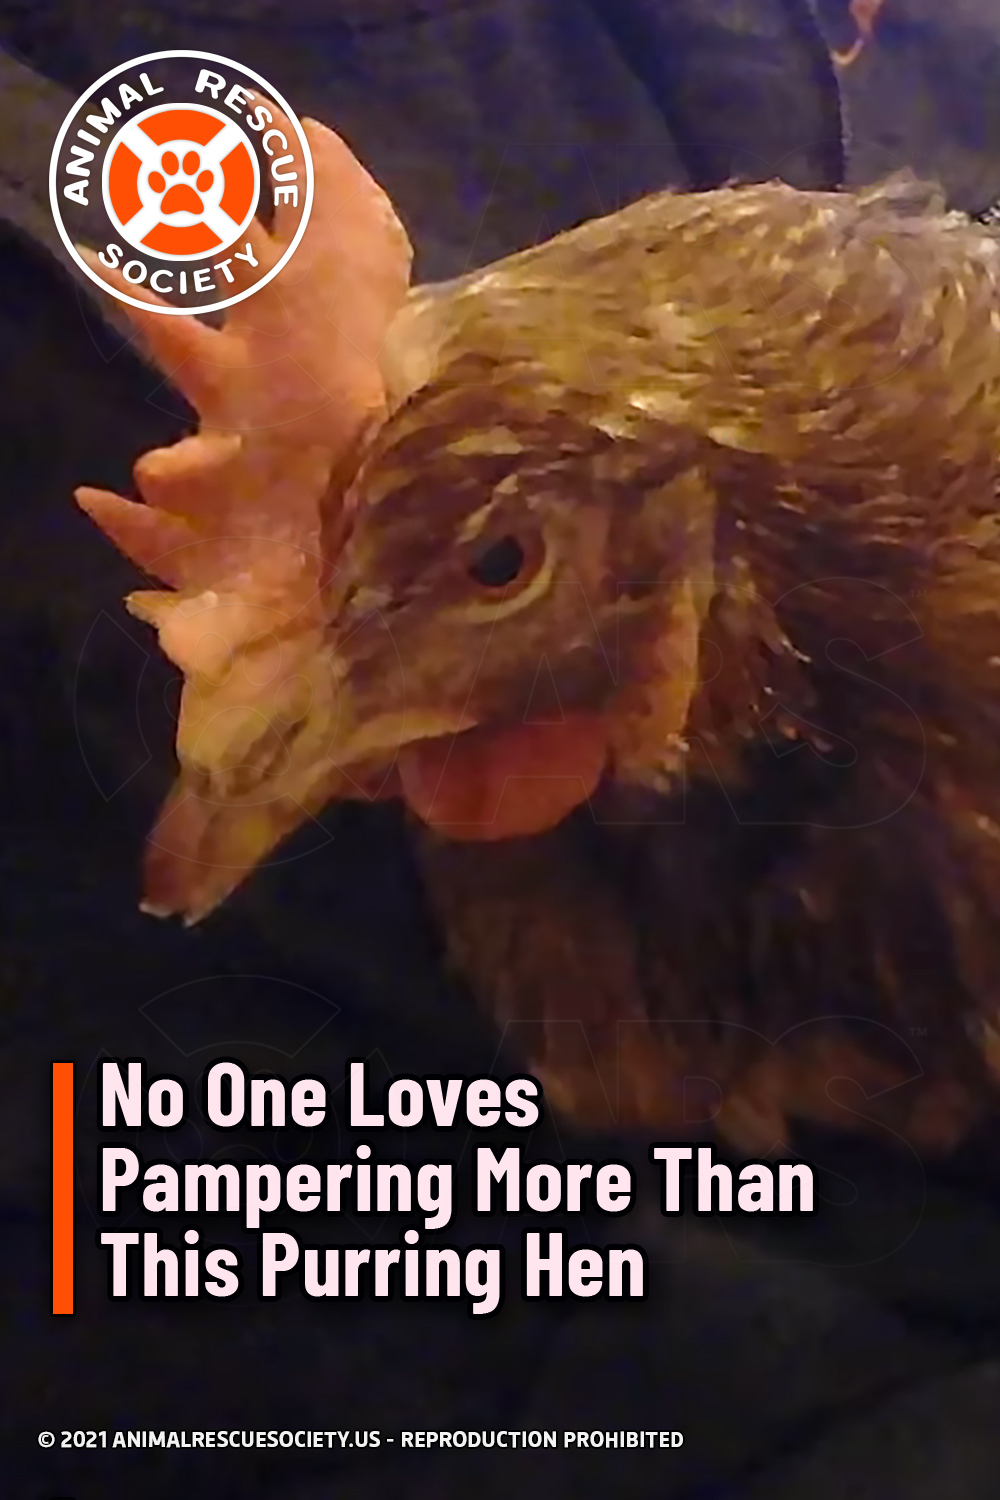 No One Loves Pampering More Than This Purring Hen